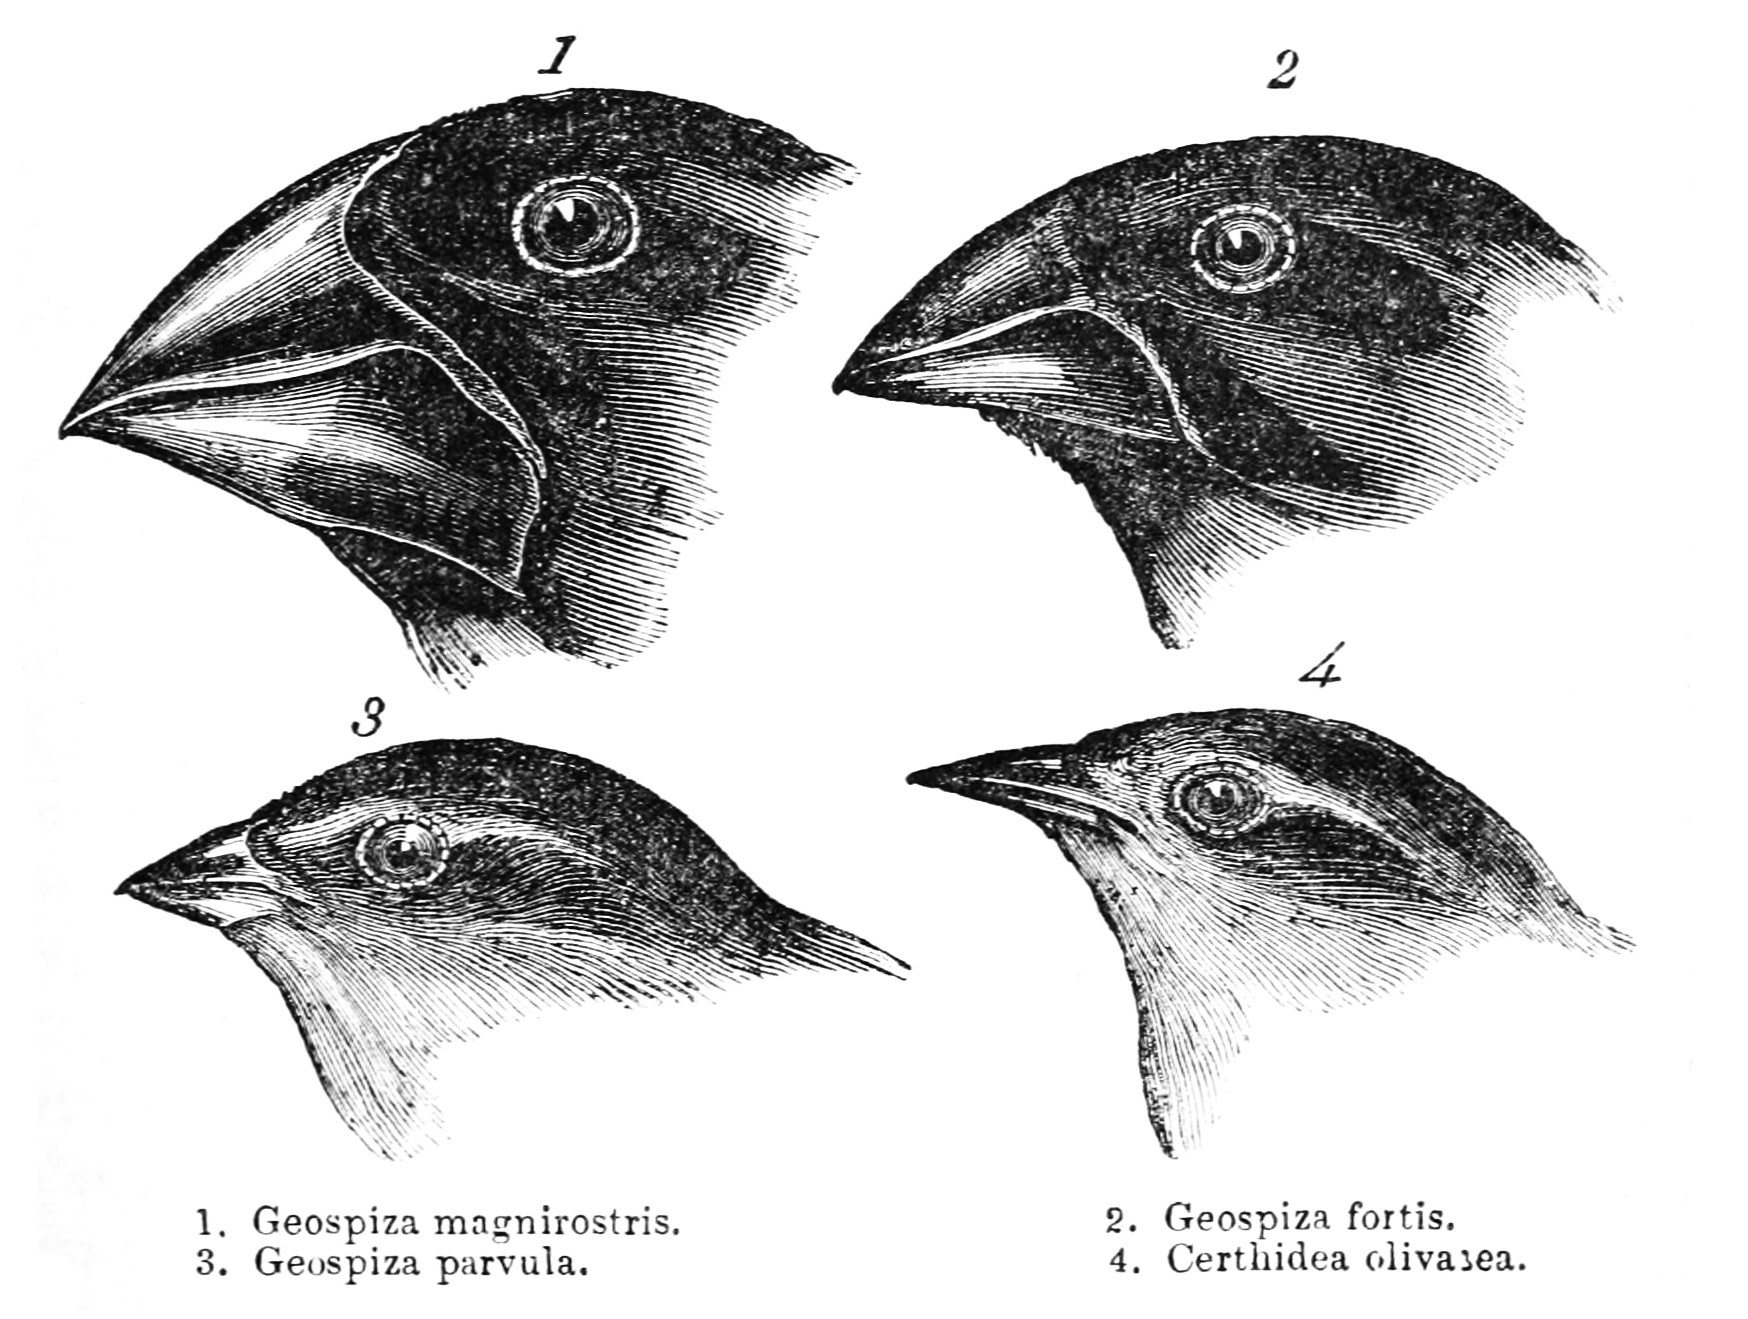 A drawing showing the heads of four different species of Galapagos finches in profile to display their different beak morphologies. Upper left: Geospiza magnirostris, the large ground finch, is a seed-easter with a deep, robust beak. Upper right: Geospiza fortis, the medium finch, has a smaller beak than the large ground finch and is a generalist. Lower left: Camarhynchus parvulus, the small tree-finch, has a small beak and feeds largely on insects. Lower right: Certhidea olivacea, the green warbler-finch, has a small beak and is an insect eater.